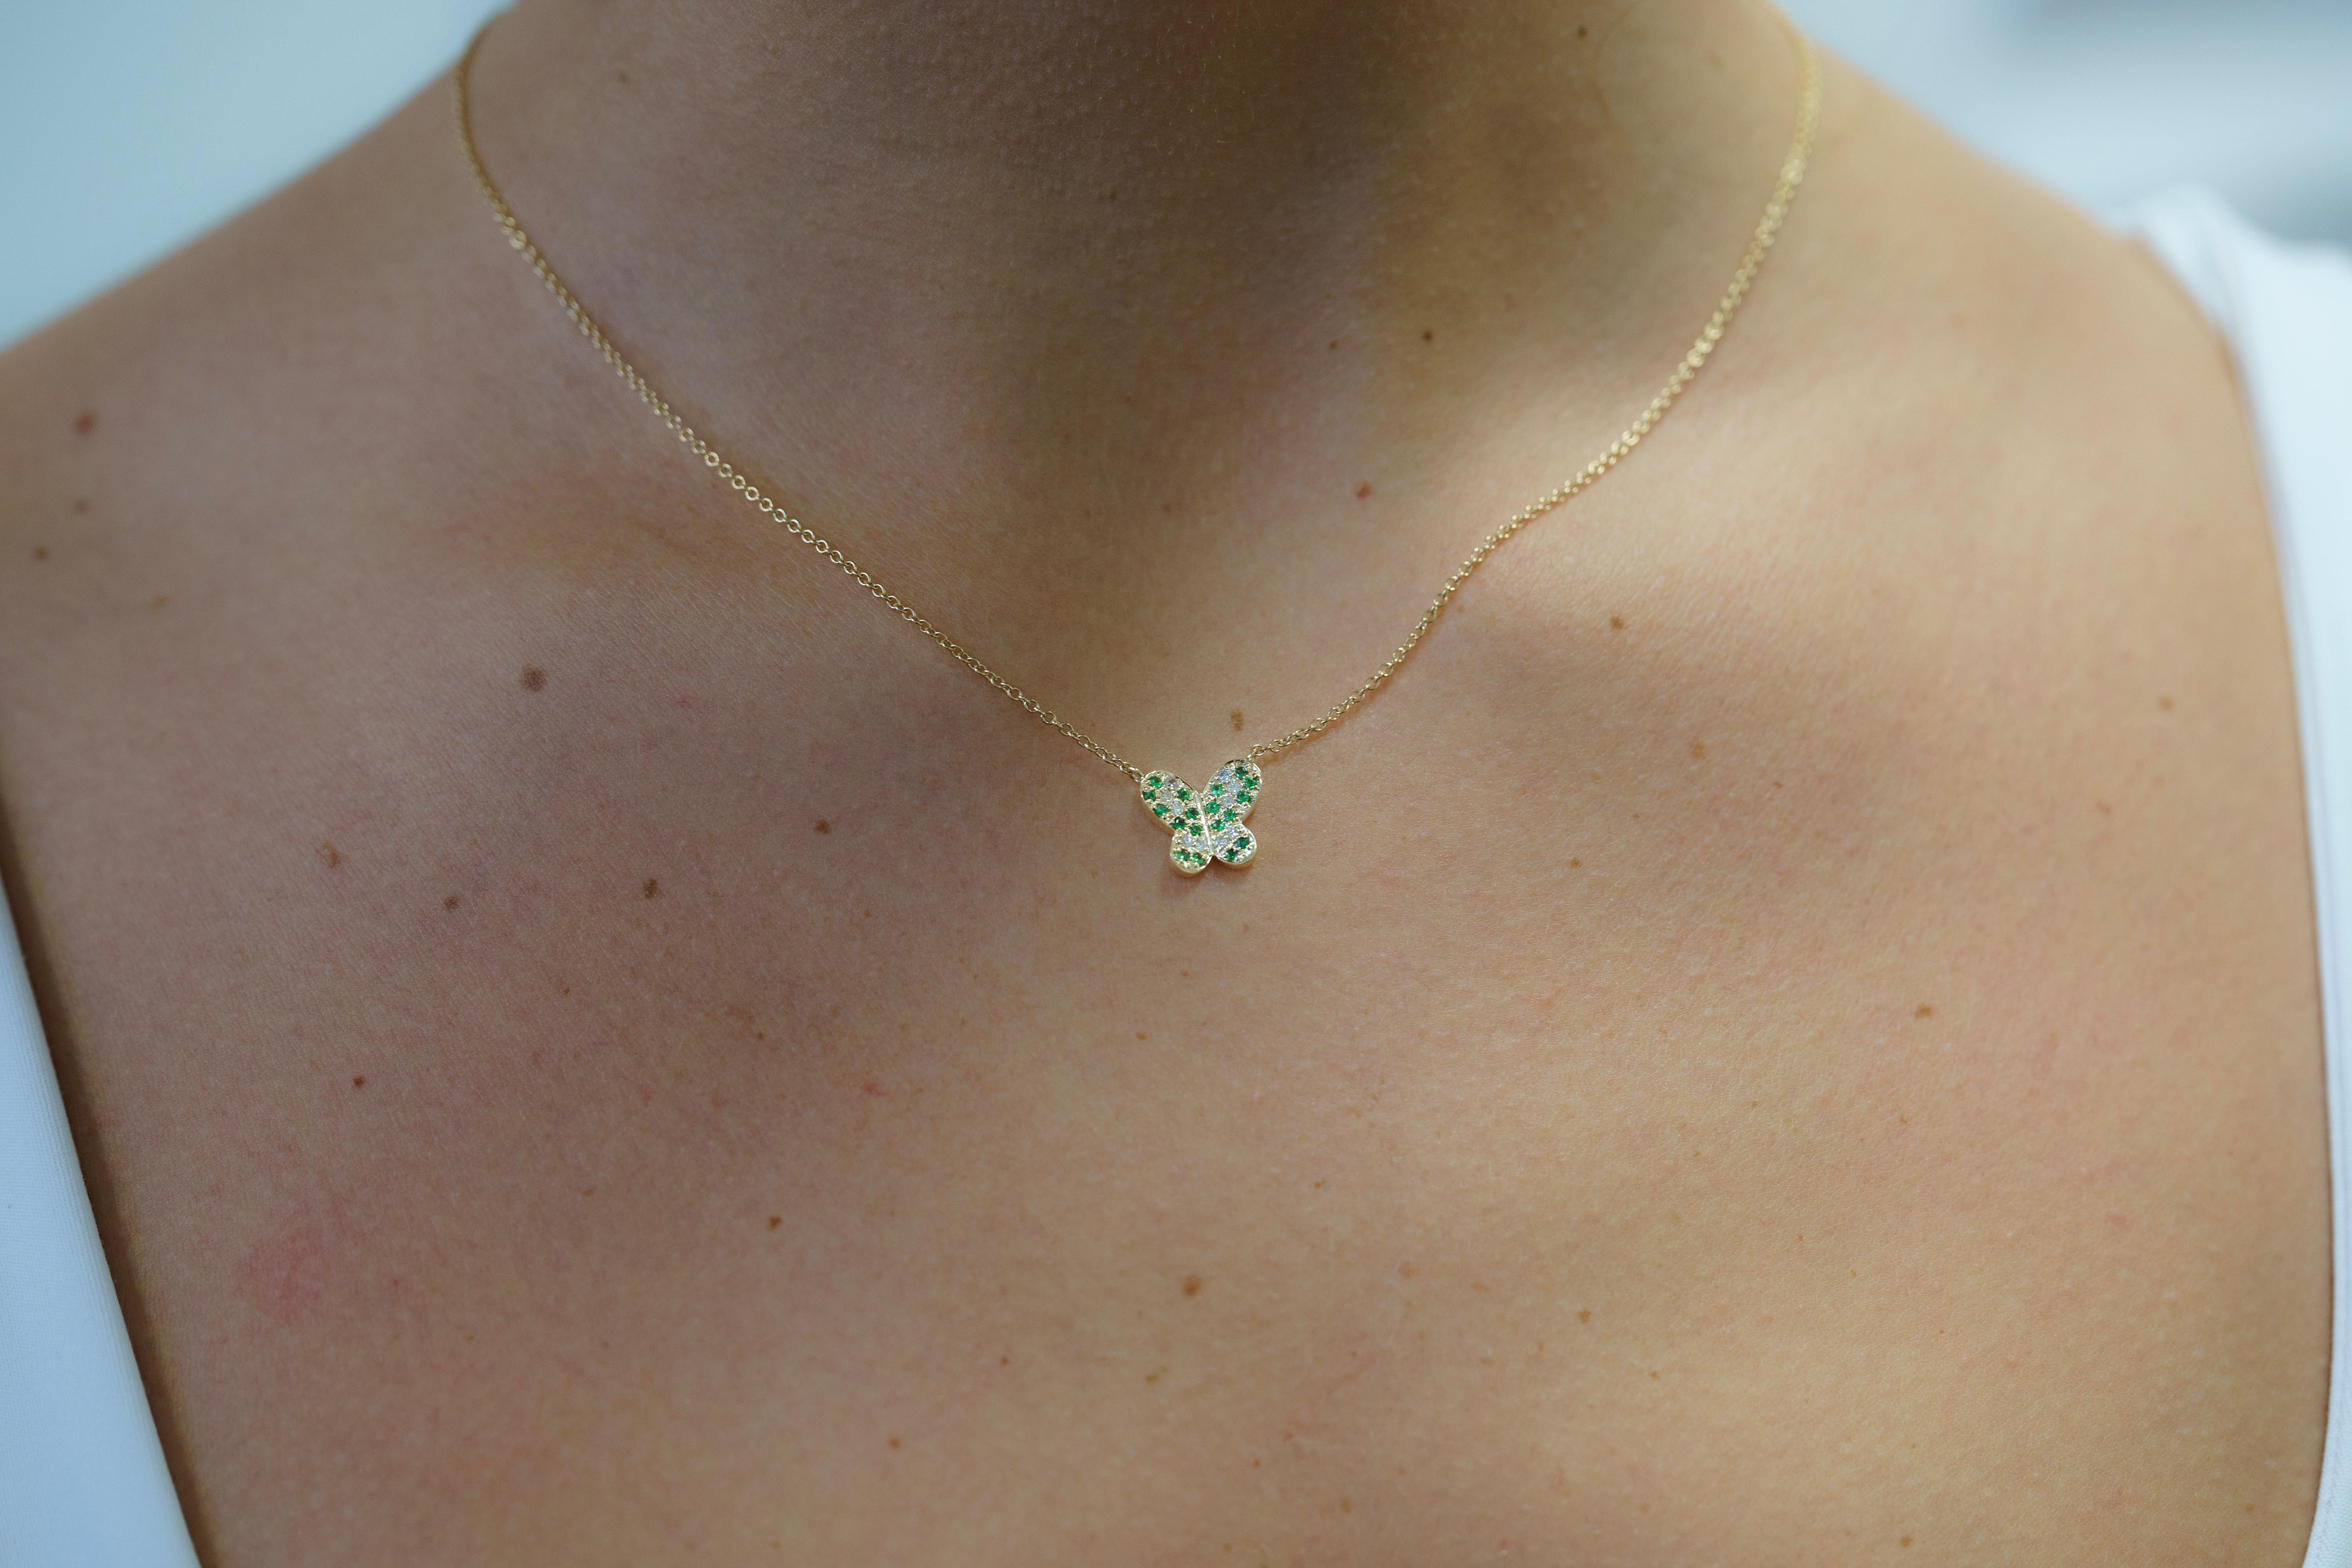 Presenting a Natural Green Tsavorite and Diamond Butterfly Motif Pendant, gracefully made in 14K Solid Yellow Gold.

This necklace features a round-cut natural green tsavorite and round-cut natural diamond pave cluster. Fixed on an 18-inch cable